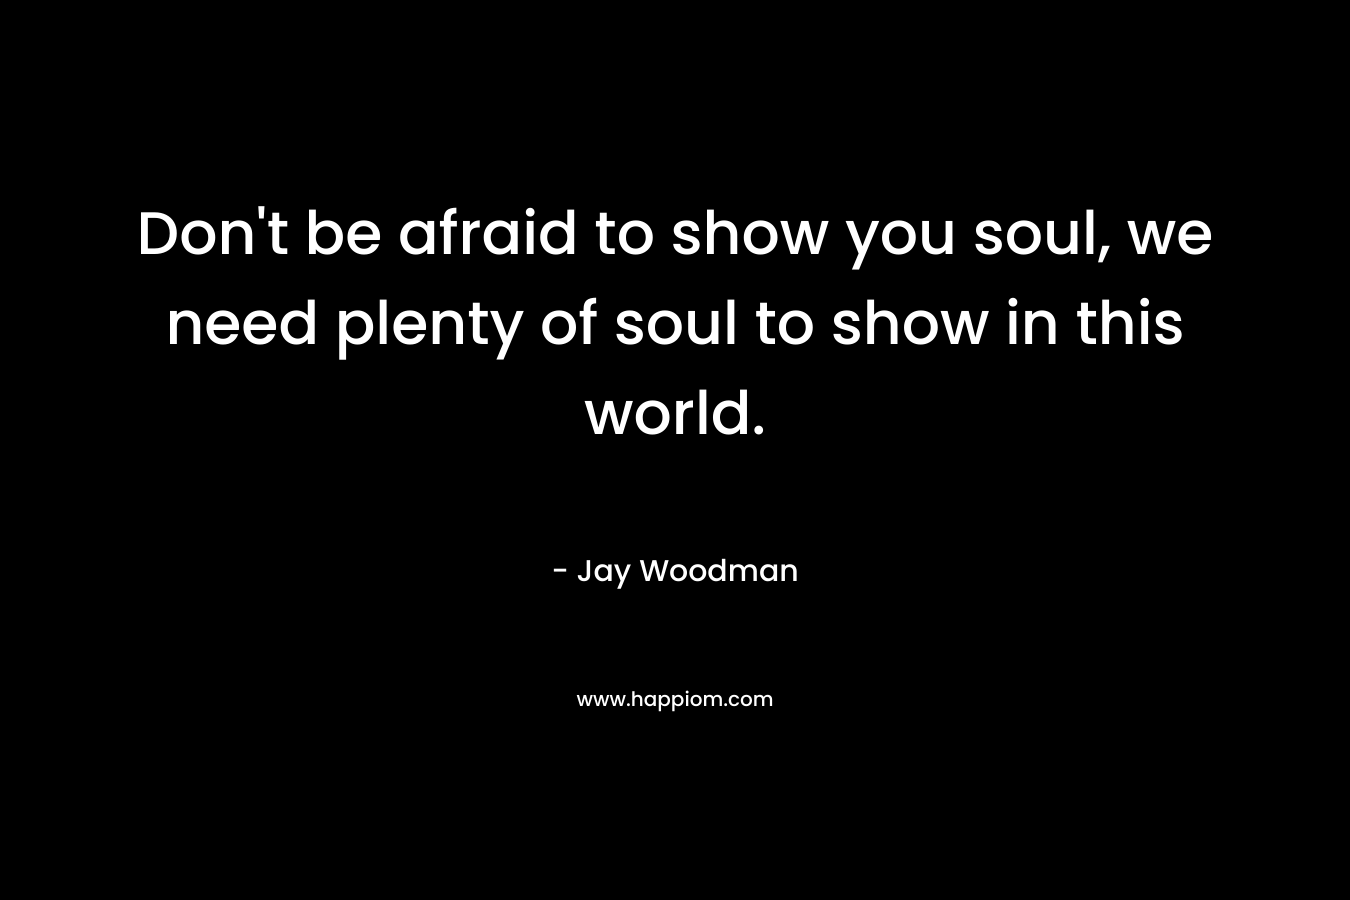 Don't be afraid to show you soul, we need plenty of soul to show in this world.